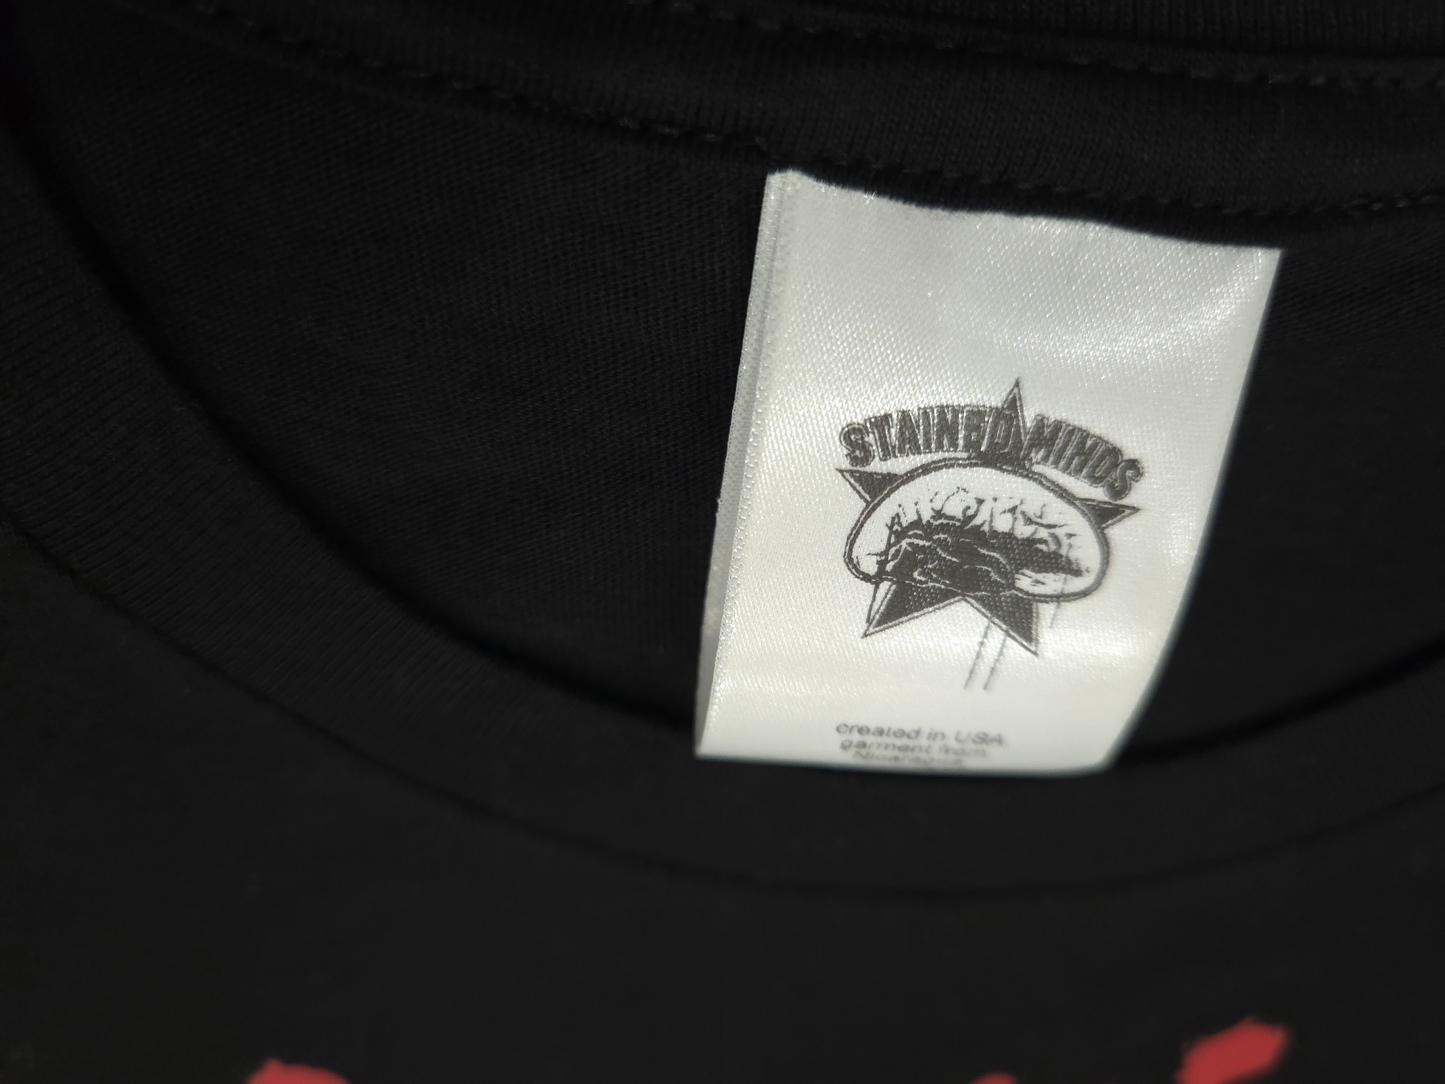 Stained Men -"Stains Before Dishonor"- Black Fitted T-Shirt